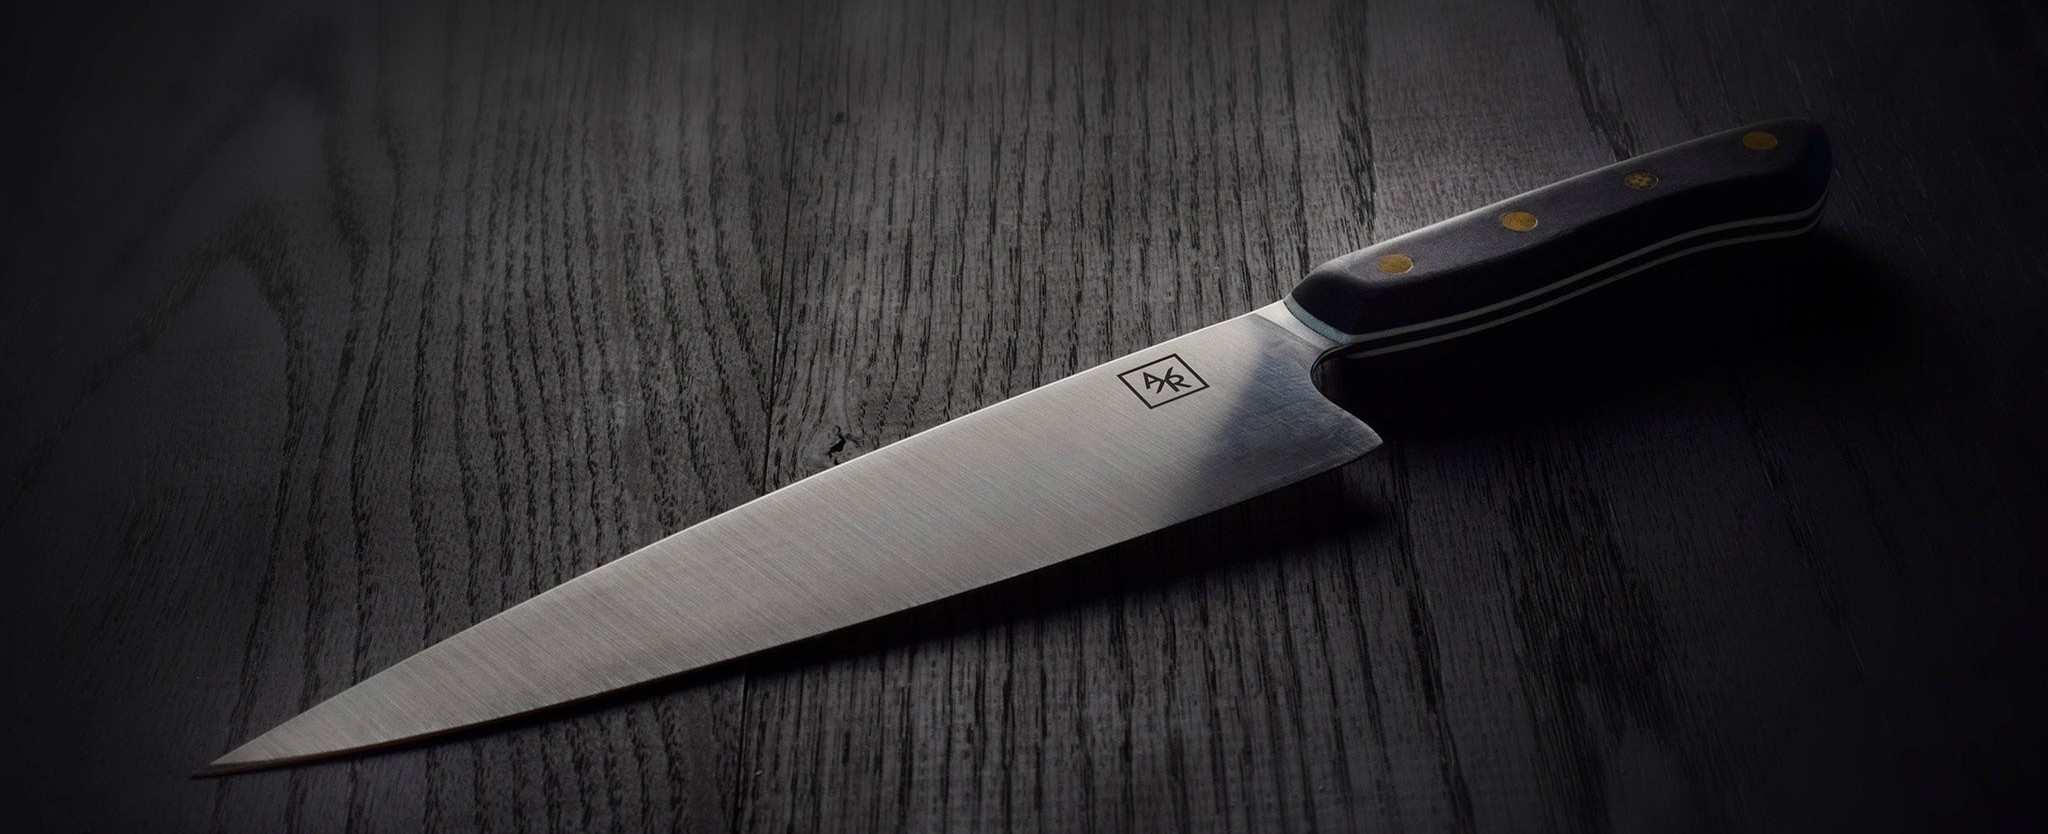 Bad Habits that Dull Your Kitchen Knives